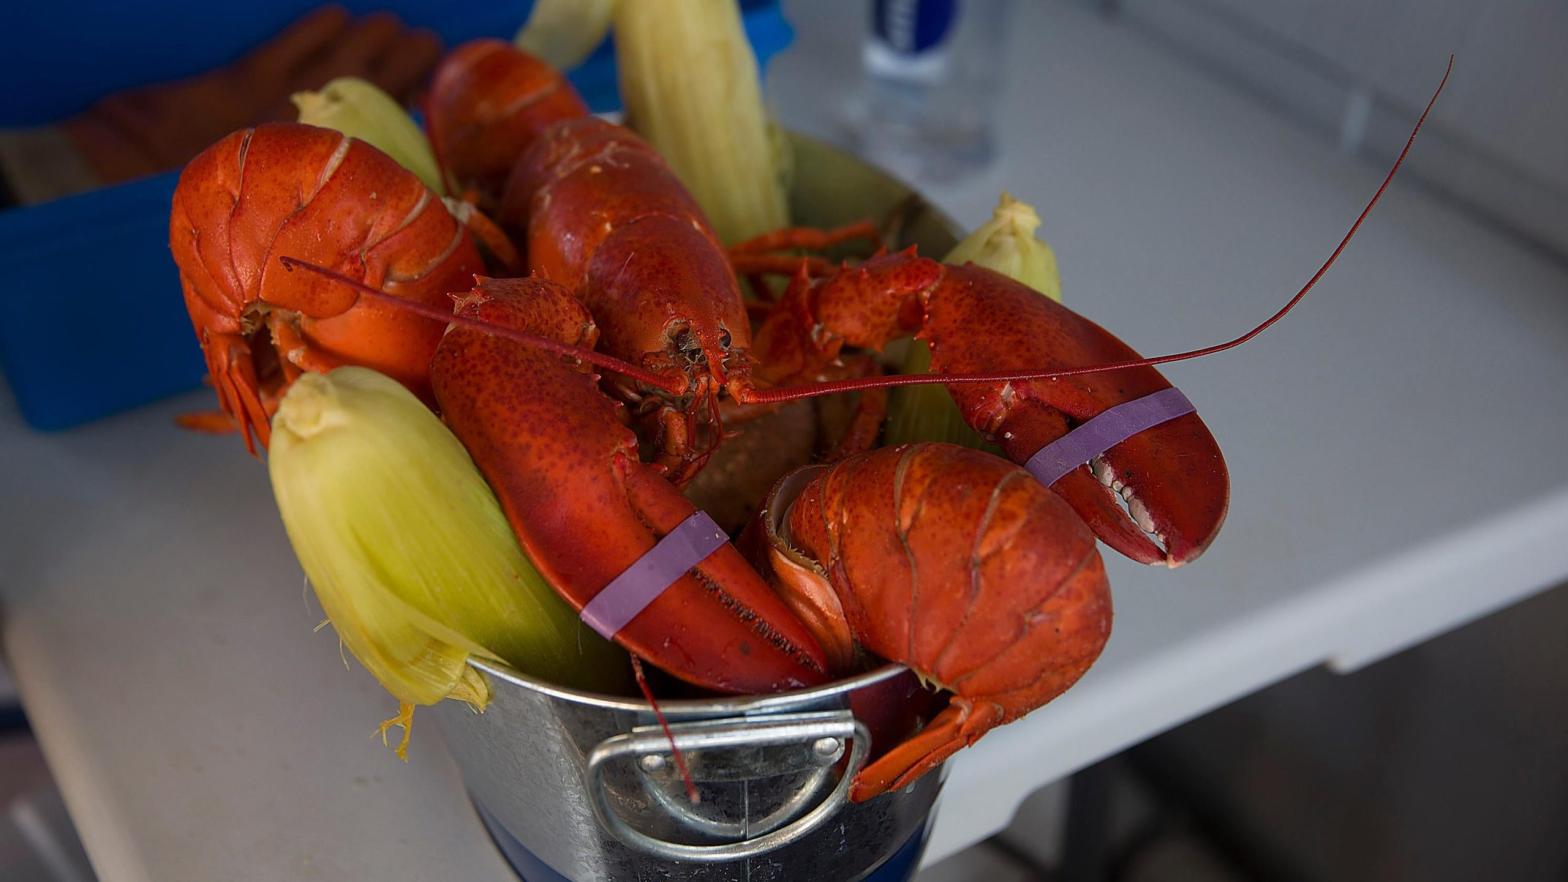 File photo of a lobster in Bar Harbour, Maine, something that would not be allowed in Maine's Tricentennial Time Capsule because it's perishable. (Photo: Joe Raedle, Getty Images)